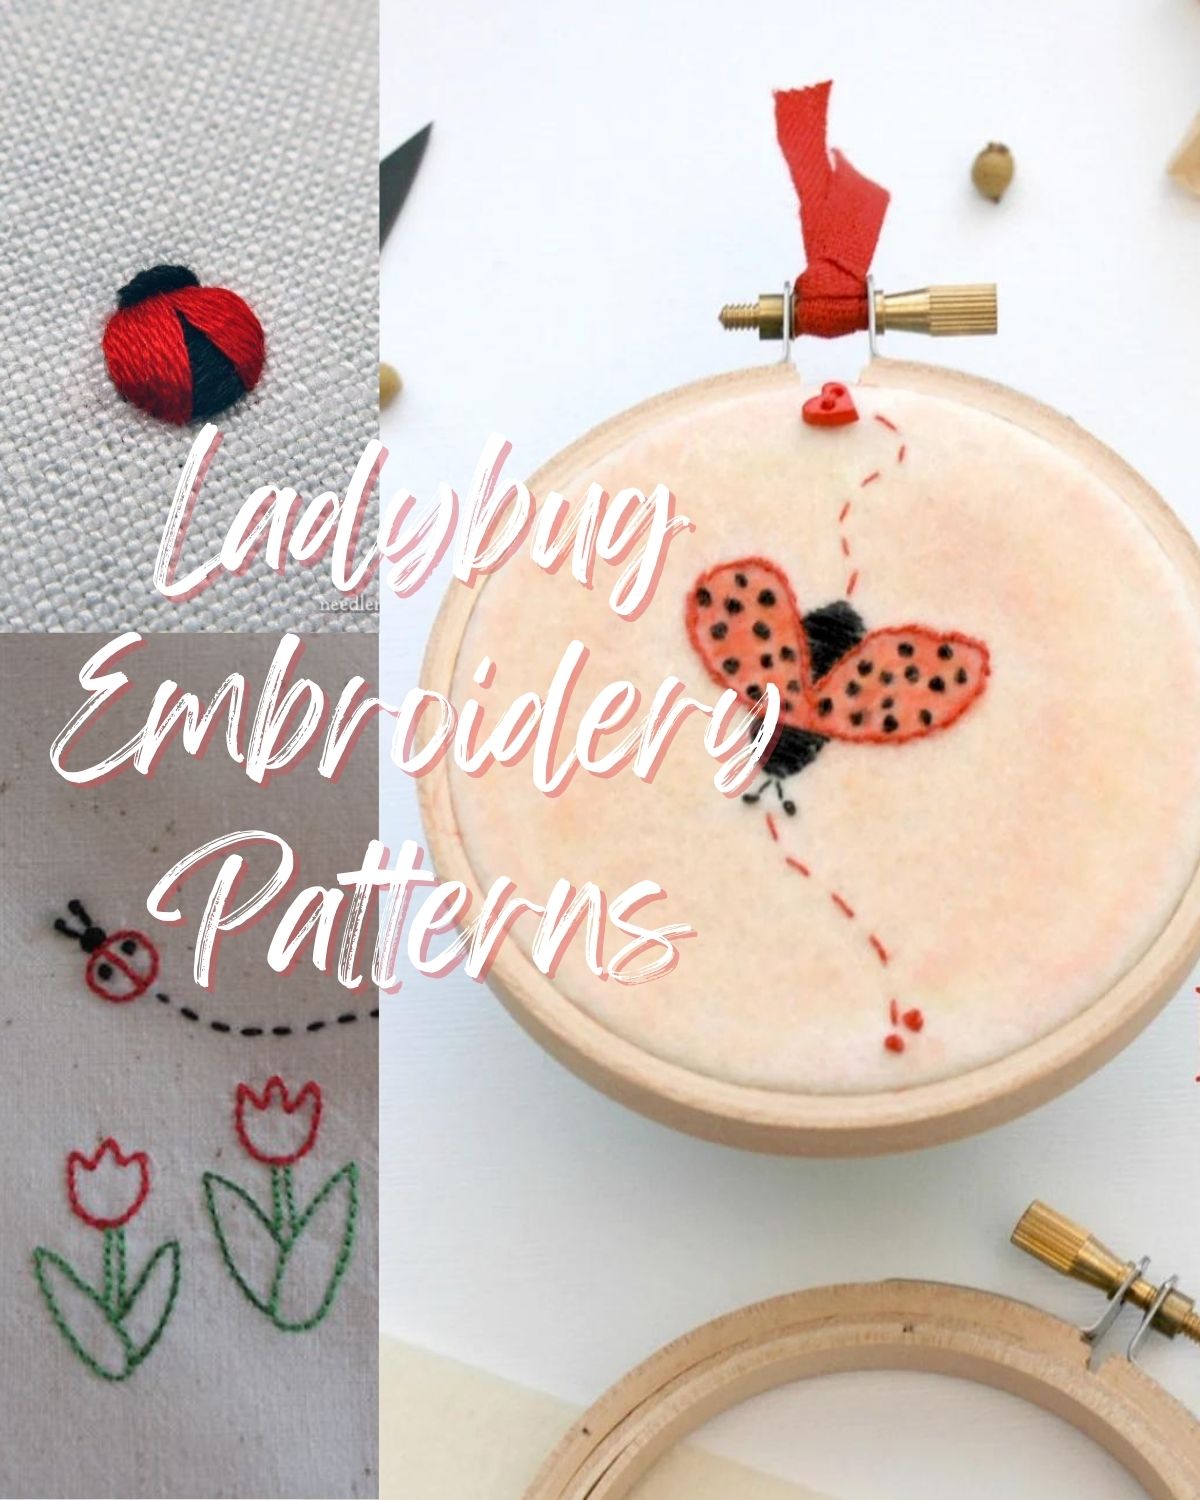 Three embroidery patterns with ladybugs 